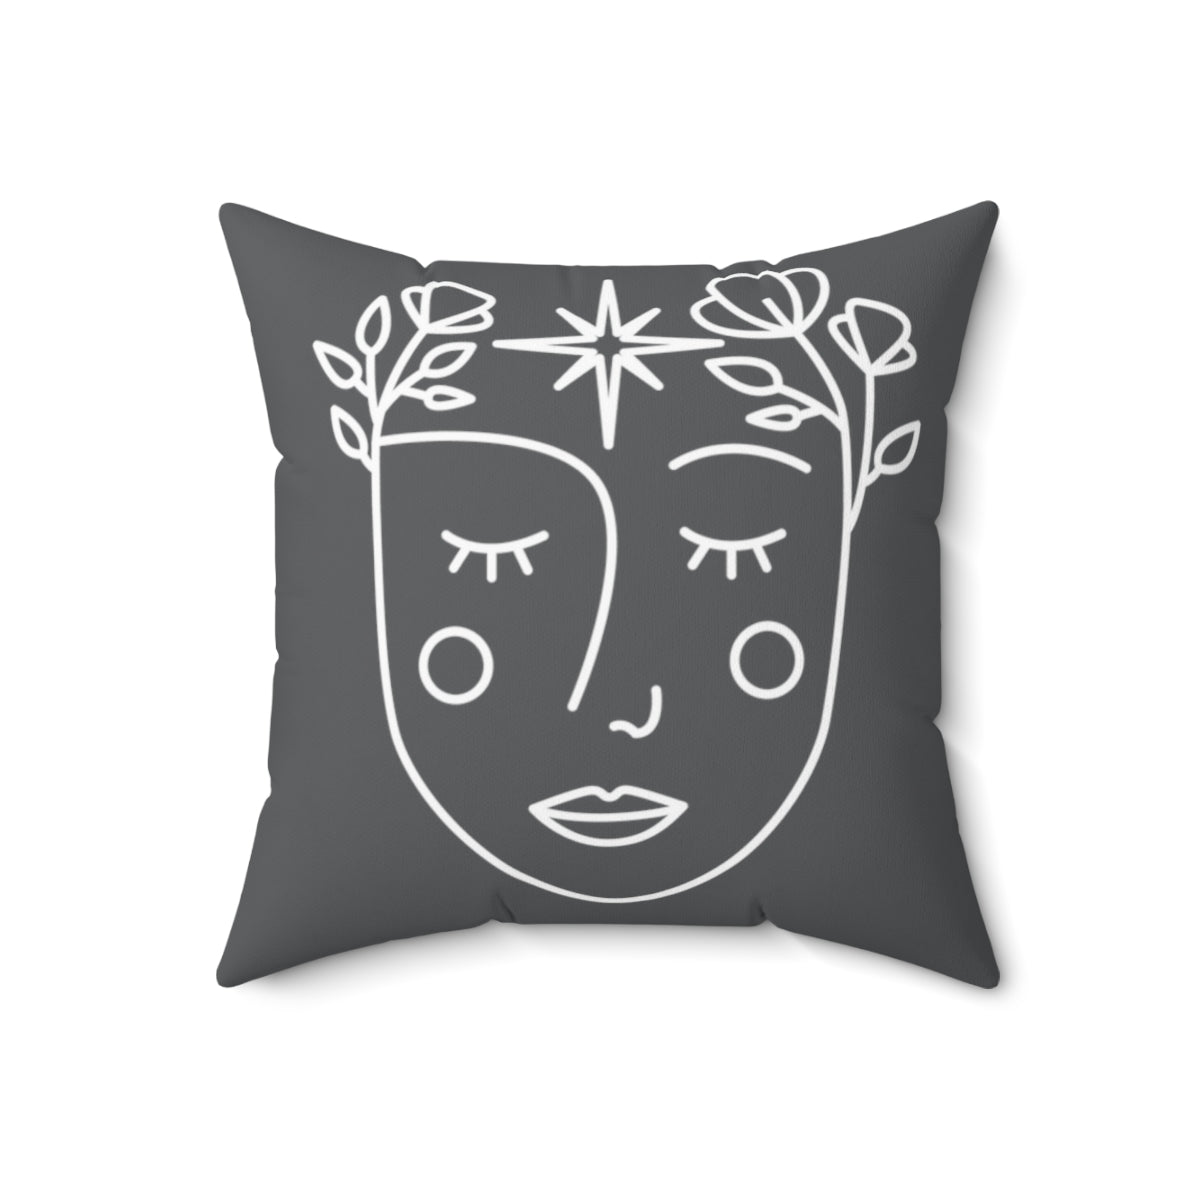 MEDITA CON PROPÓSITO - FLORAL THOUGHTS CUSHION